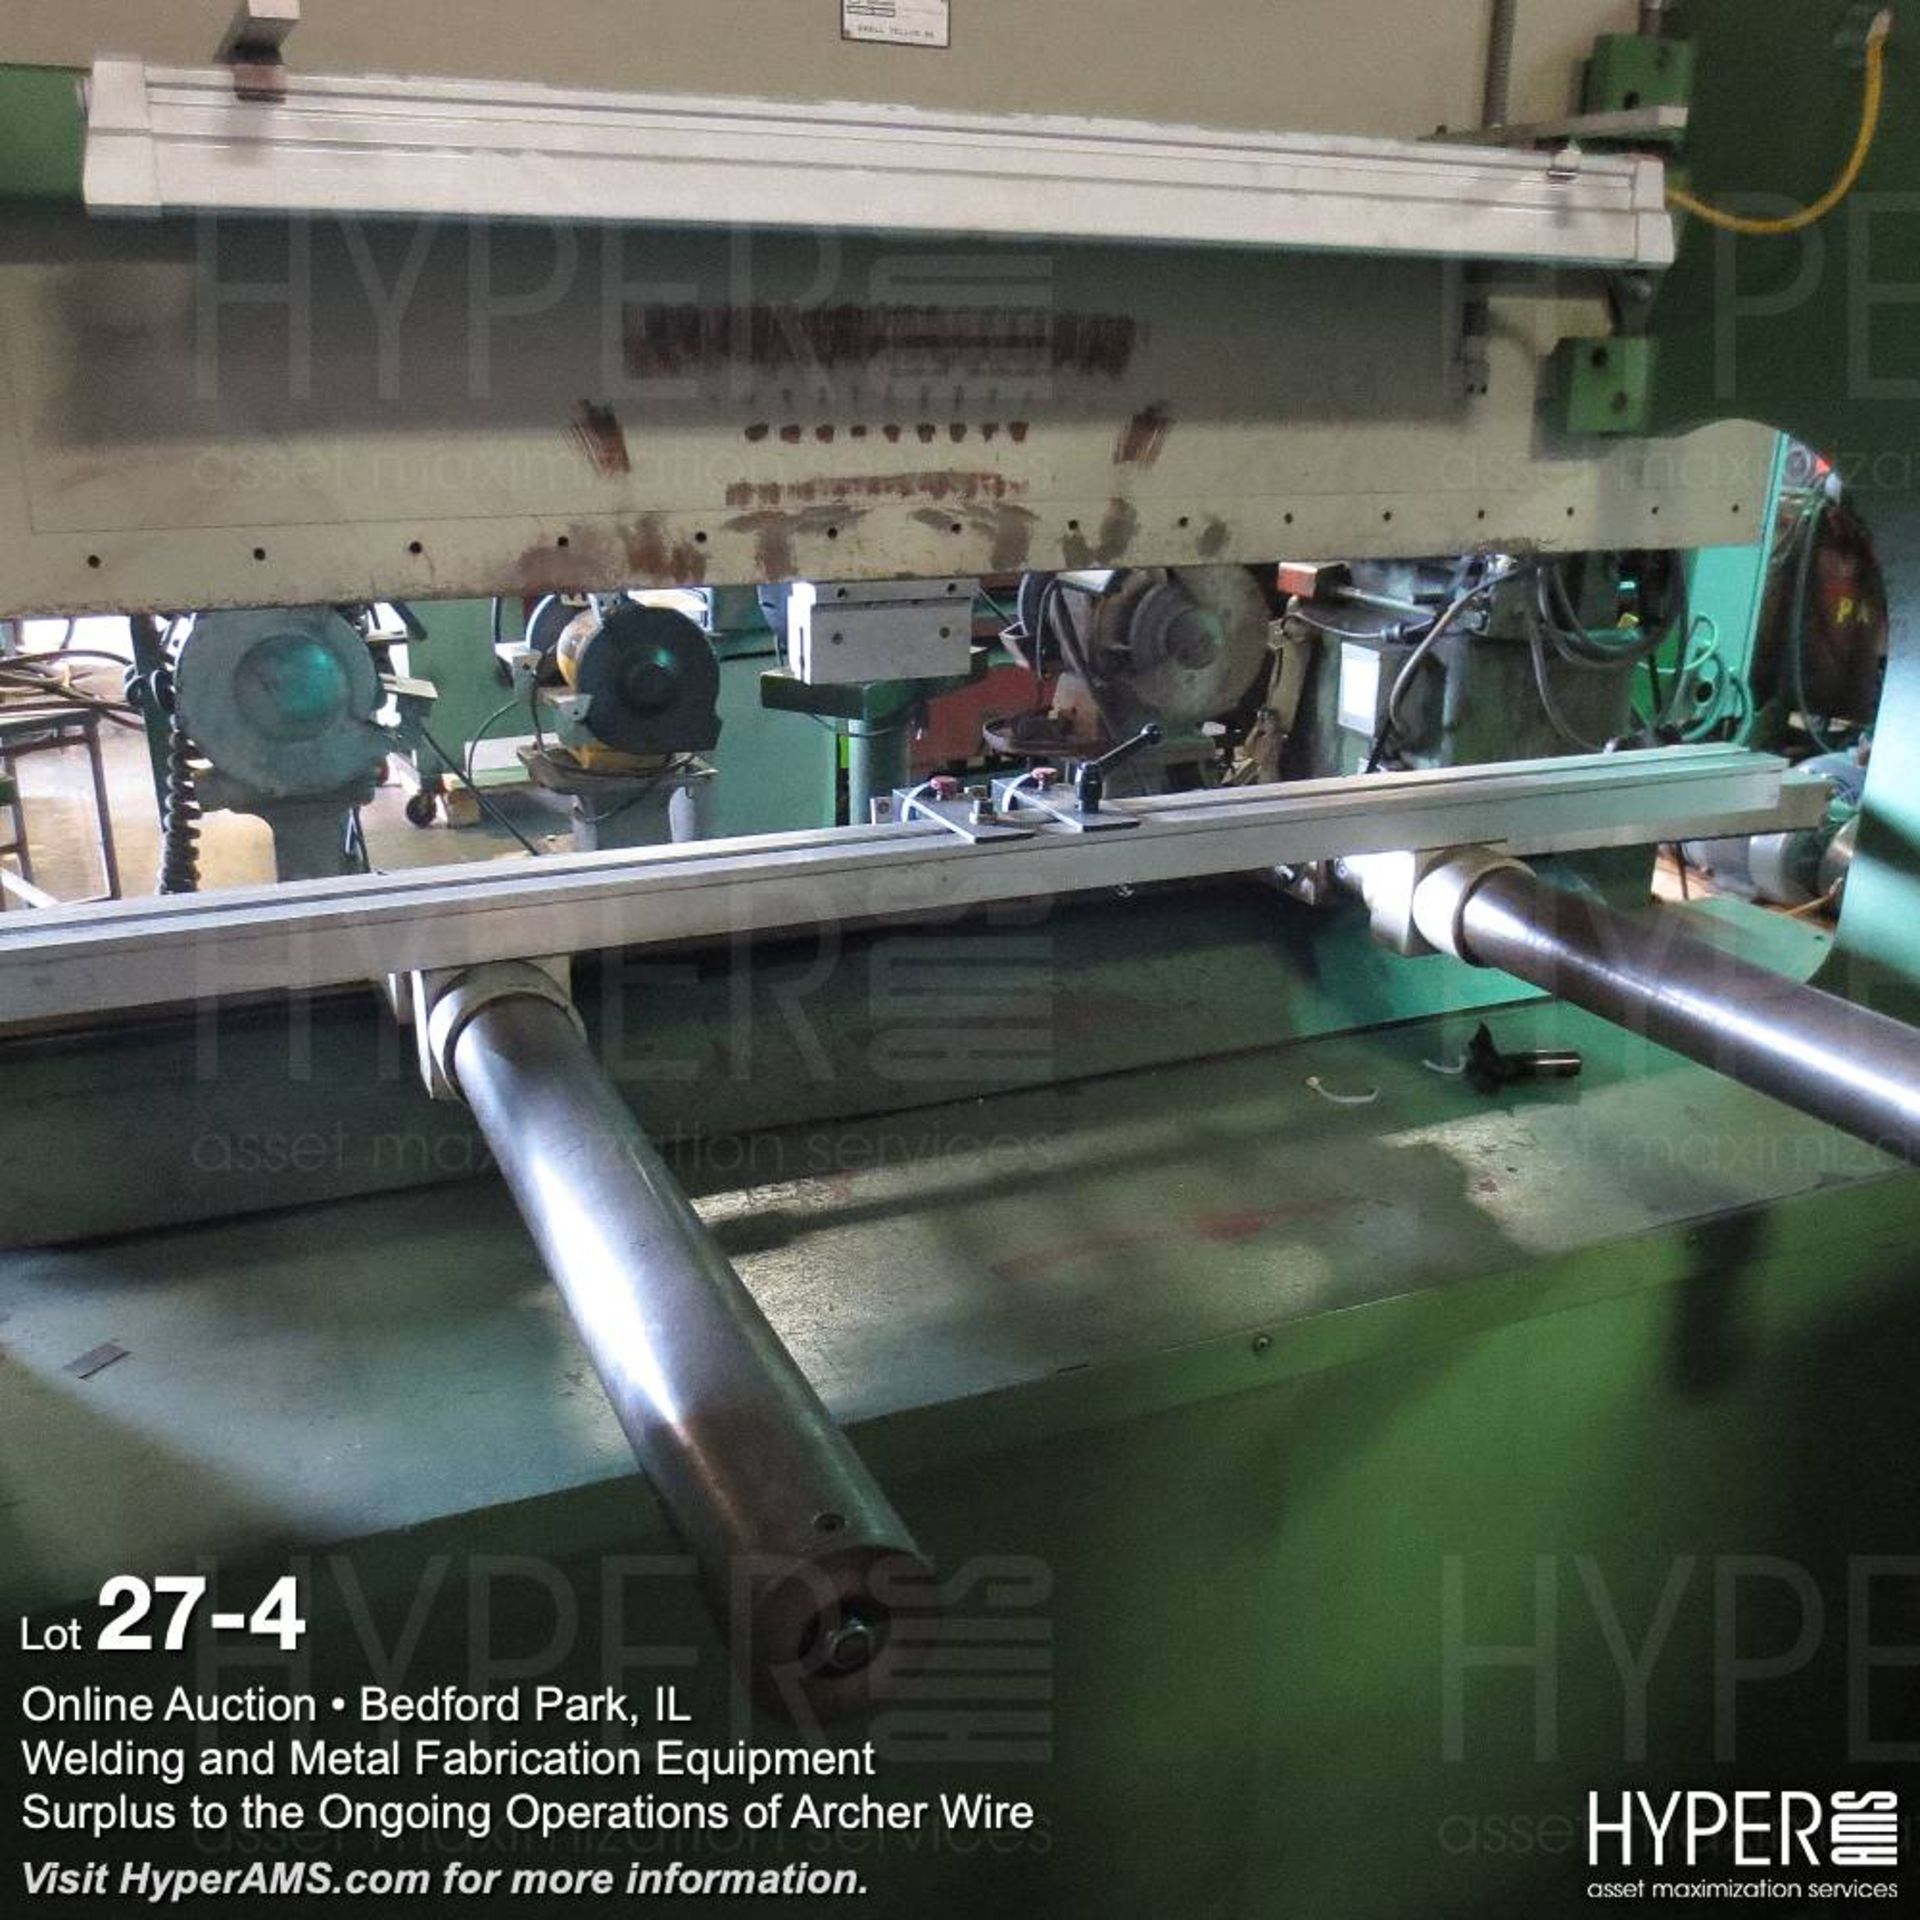 Guifil 66ton cap hydraulic press brake 79" bed, stroke 3.93, year 1993, number 013394, back gage, RE - Image 2 of 5